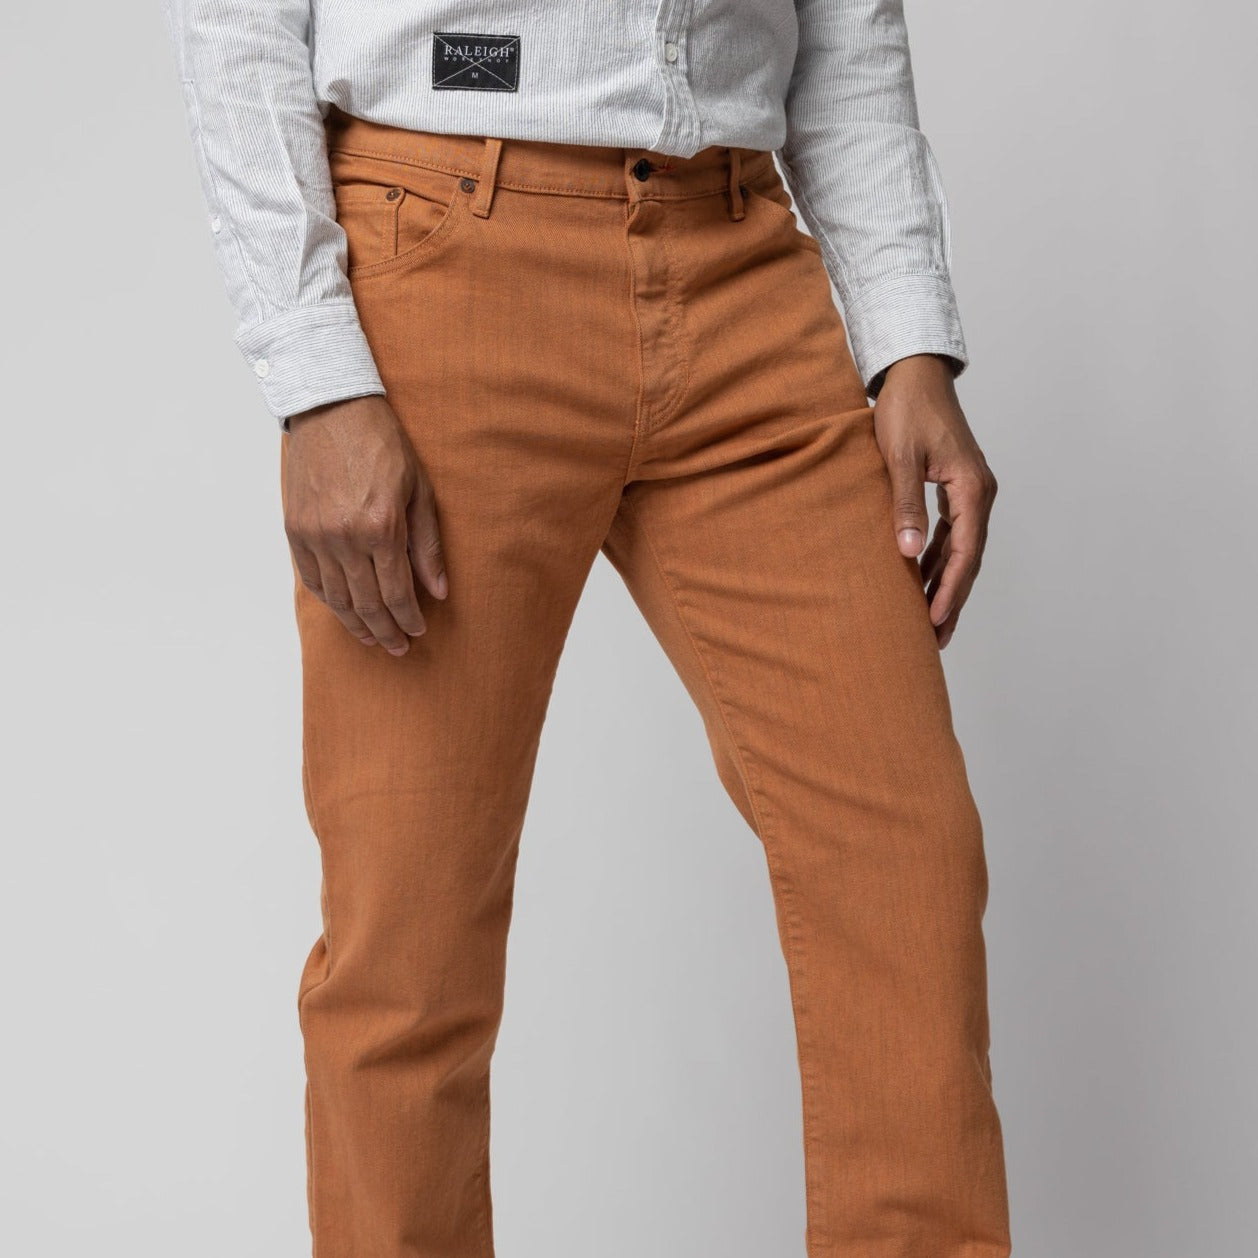 angle hover: Alexander Stretch Terracotta Man wears a Raleigh Workshop denim stretch jean pant in terracotta